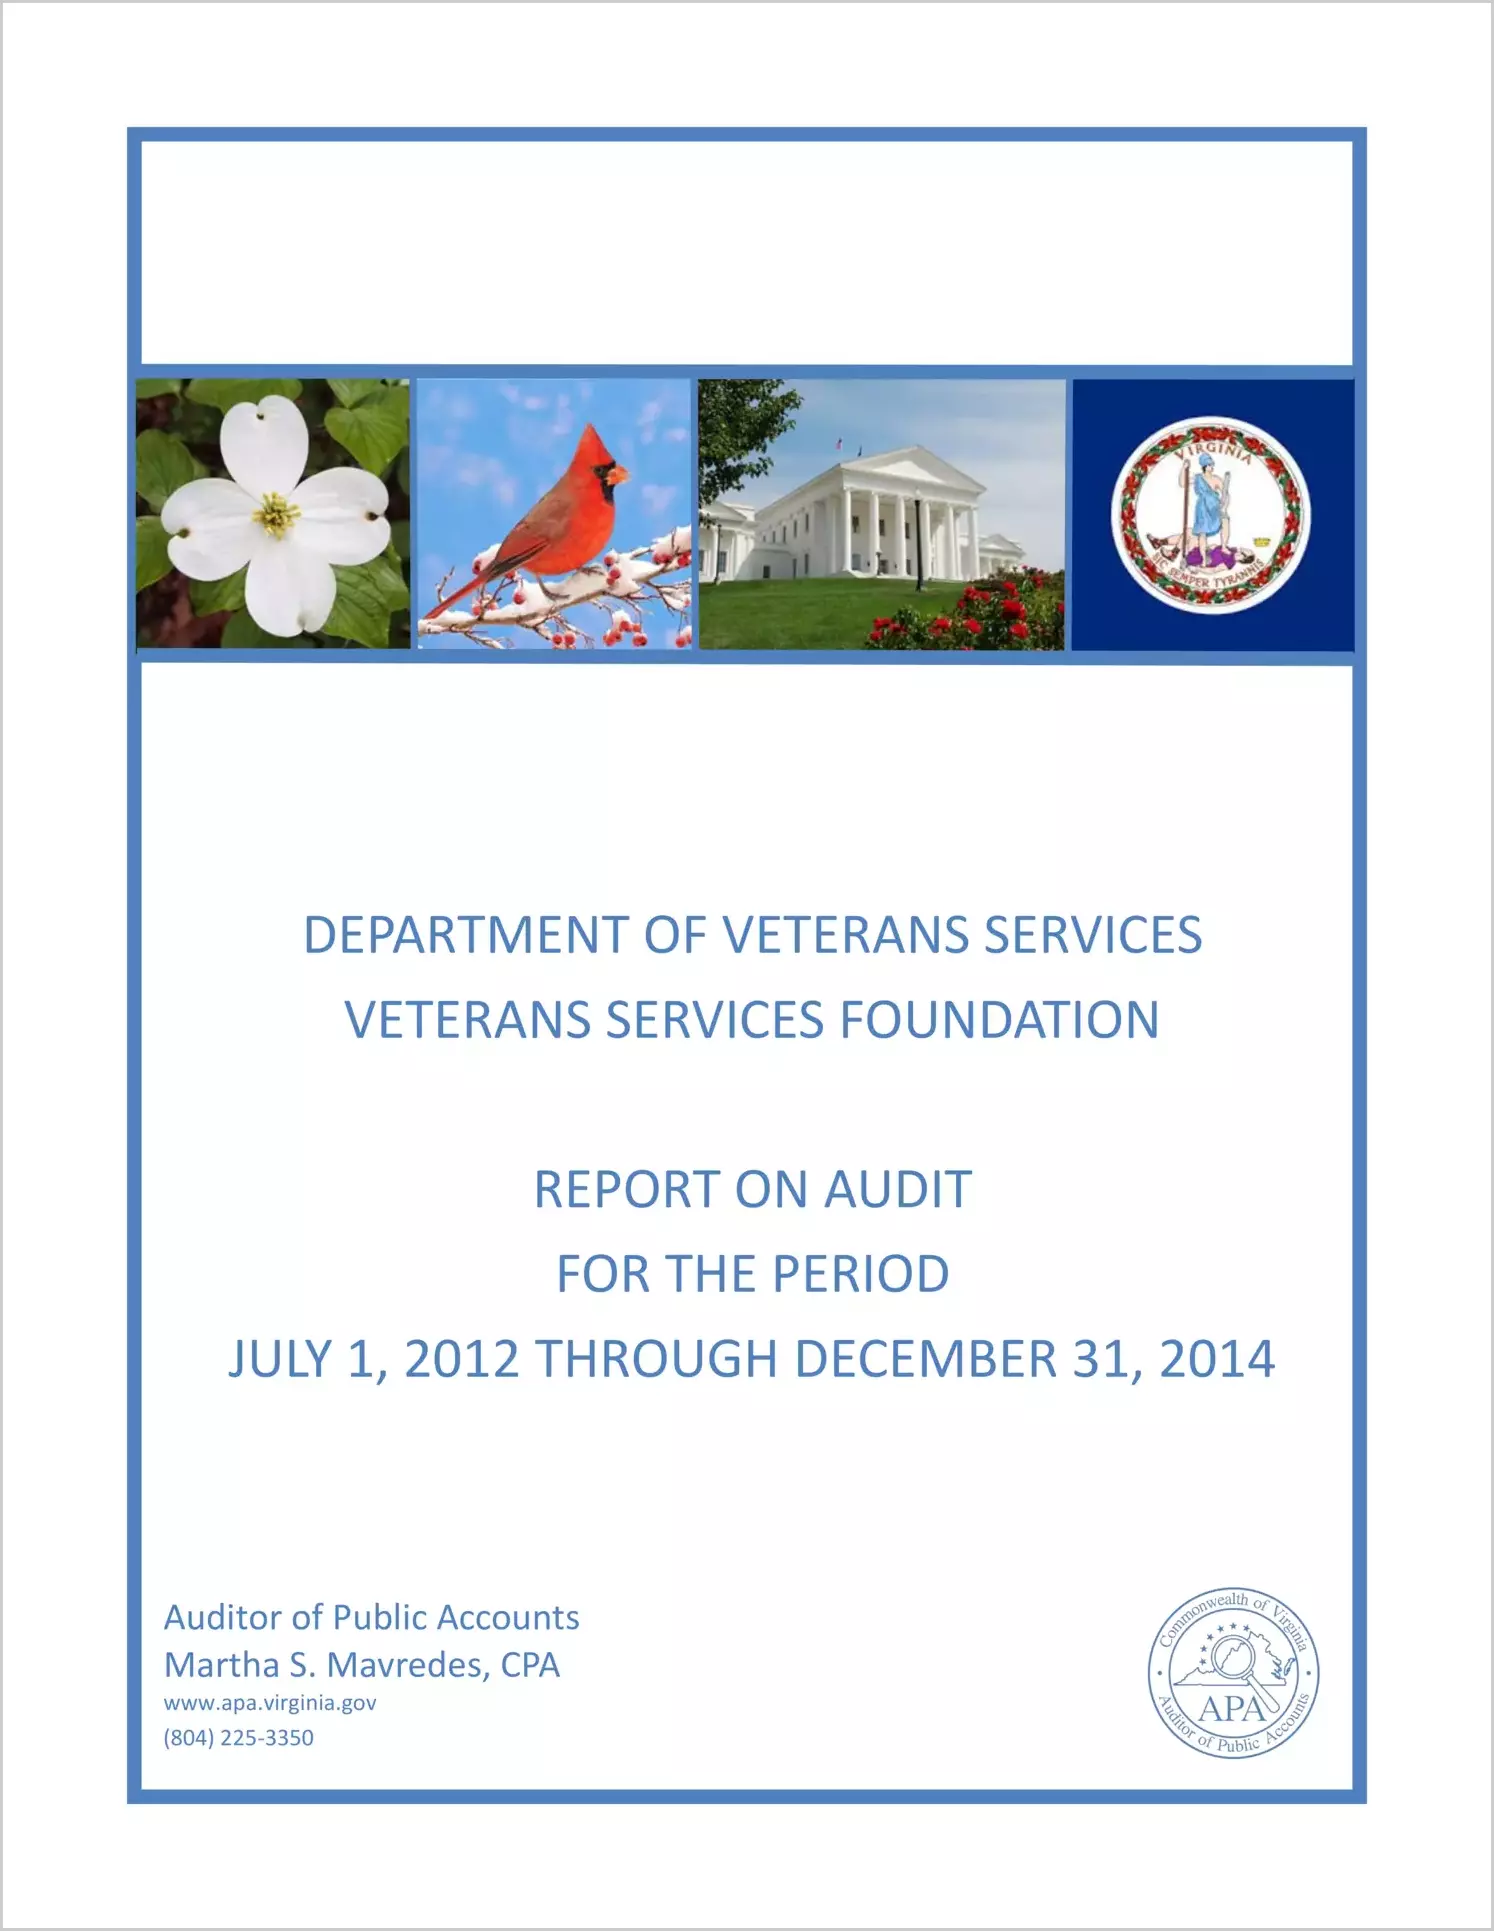 Department of Veterans Services and the Veterans Services Foundation for the period July 1, 2012 through December 31, 2014